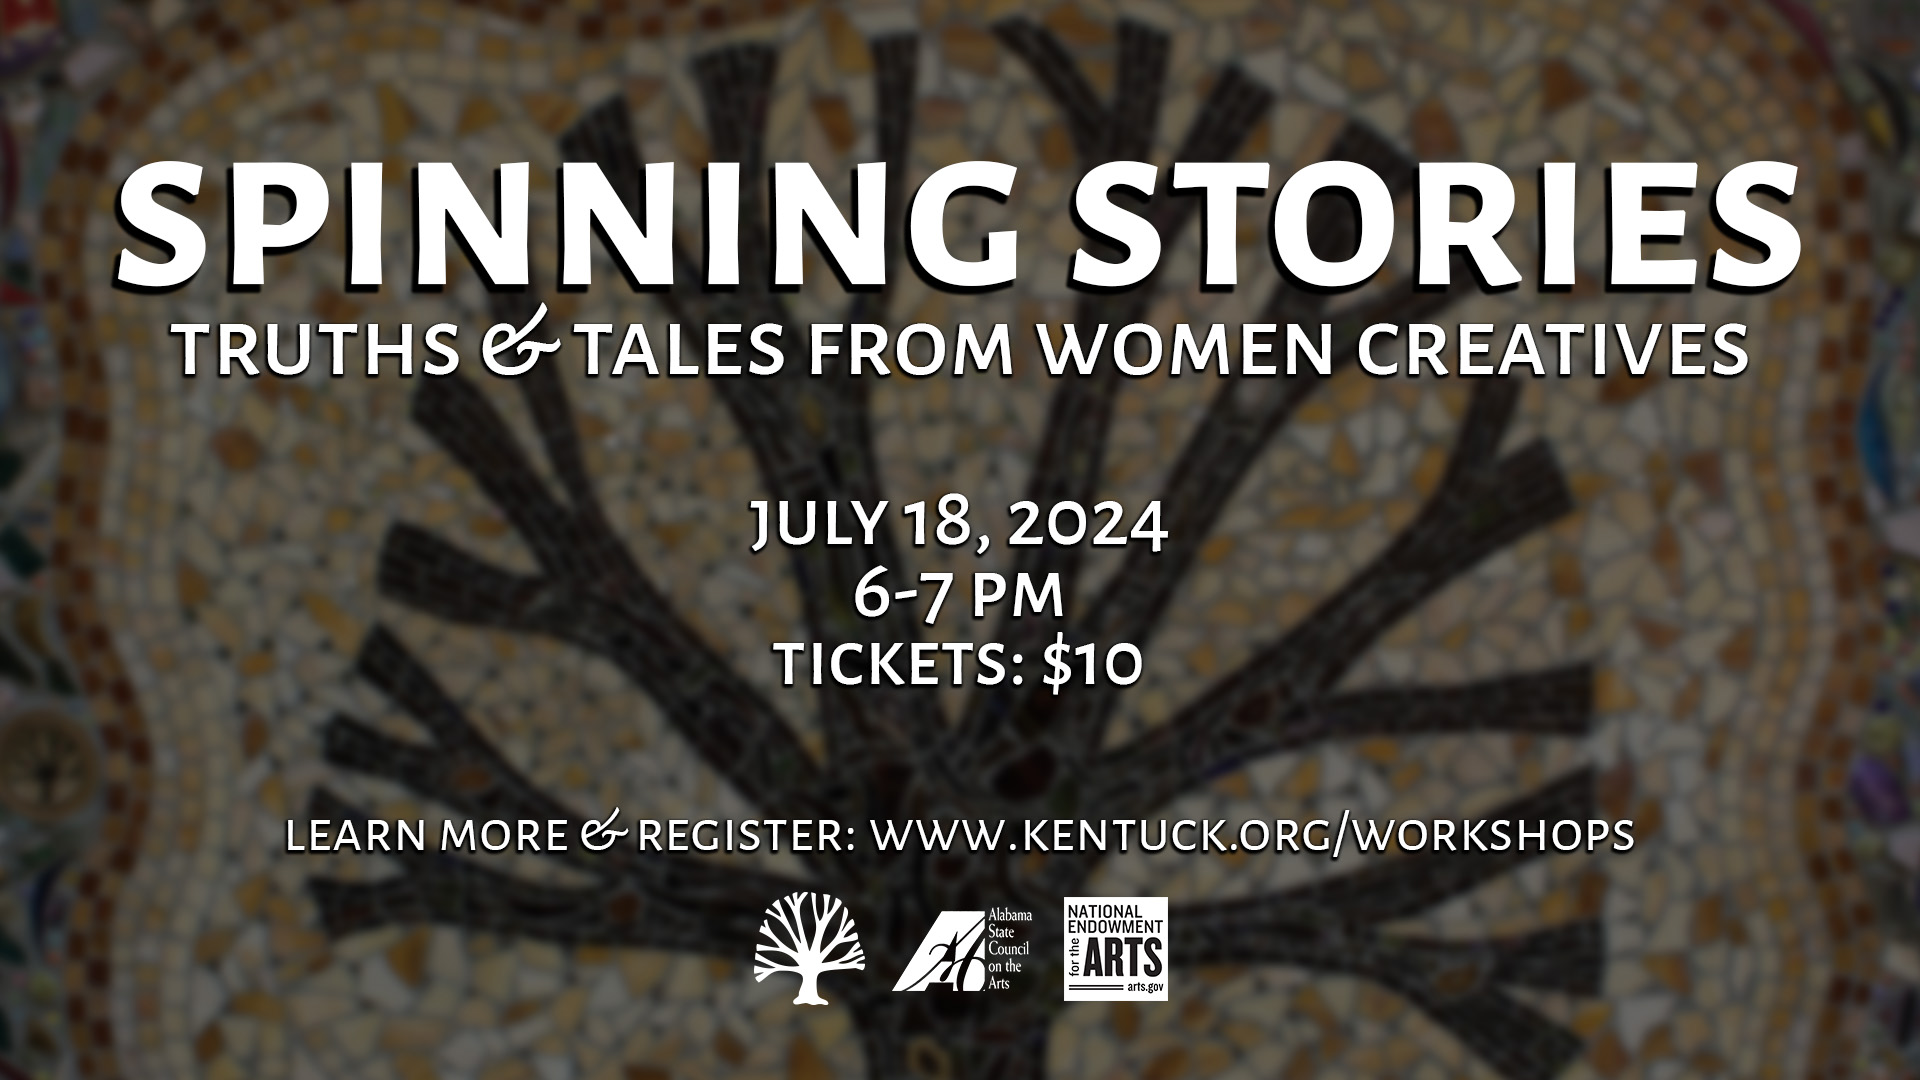 Spinning Stories: Truths and Tales from Women Creatives